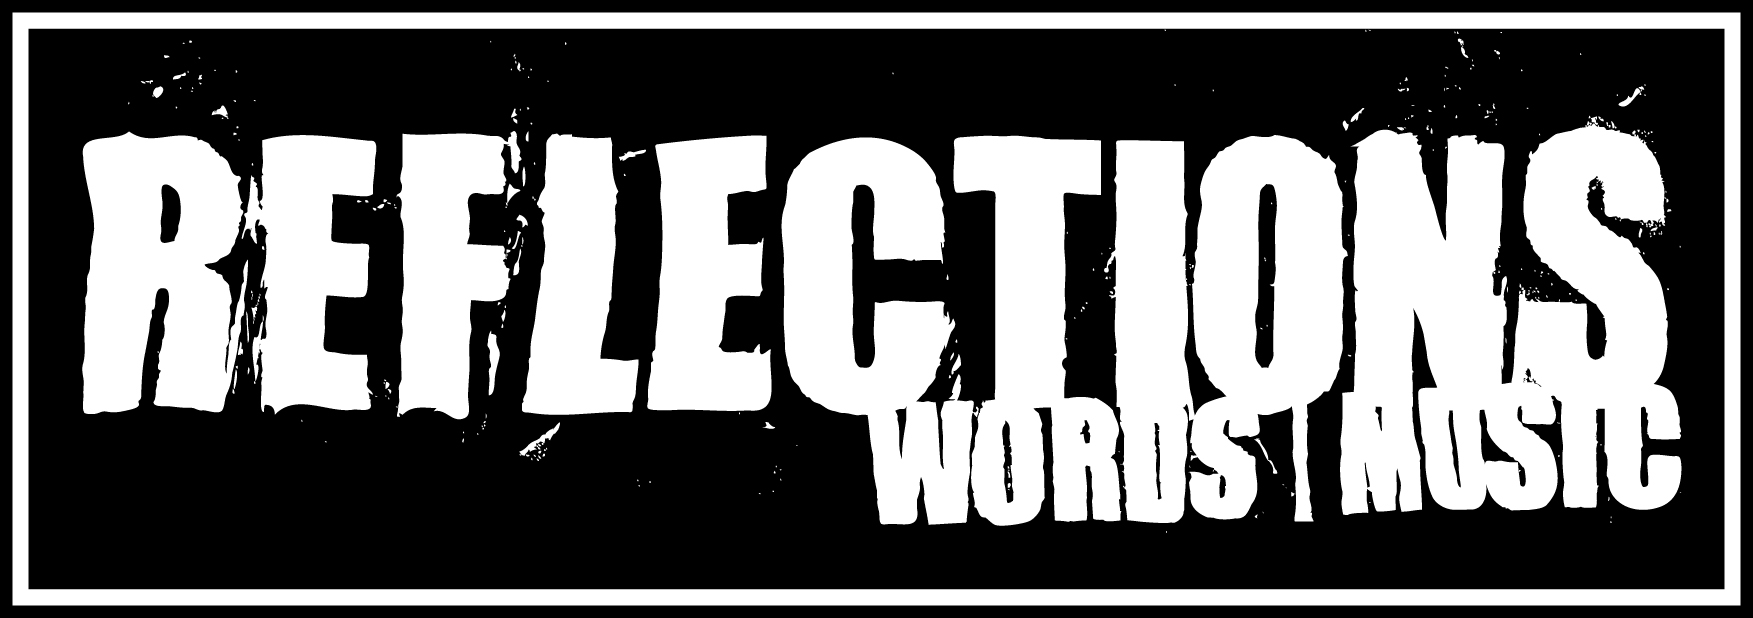 Reflections announce two new bands